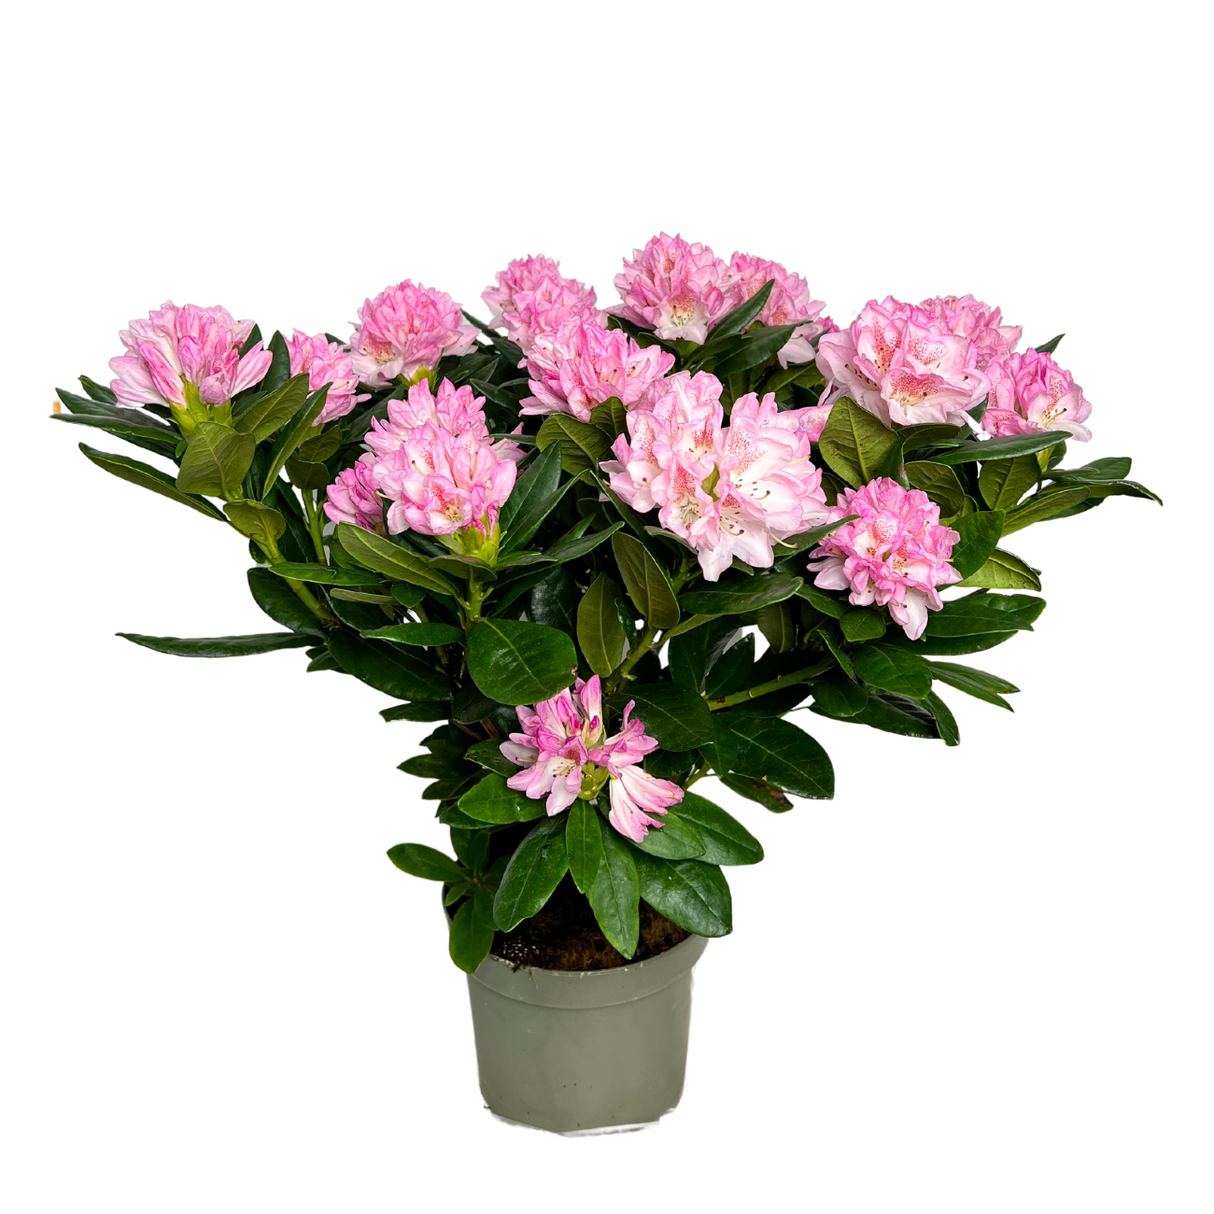 Rhododendron 50-60